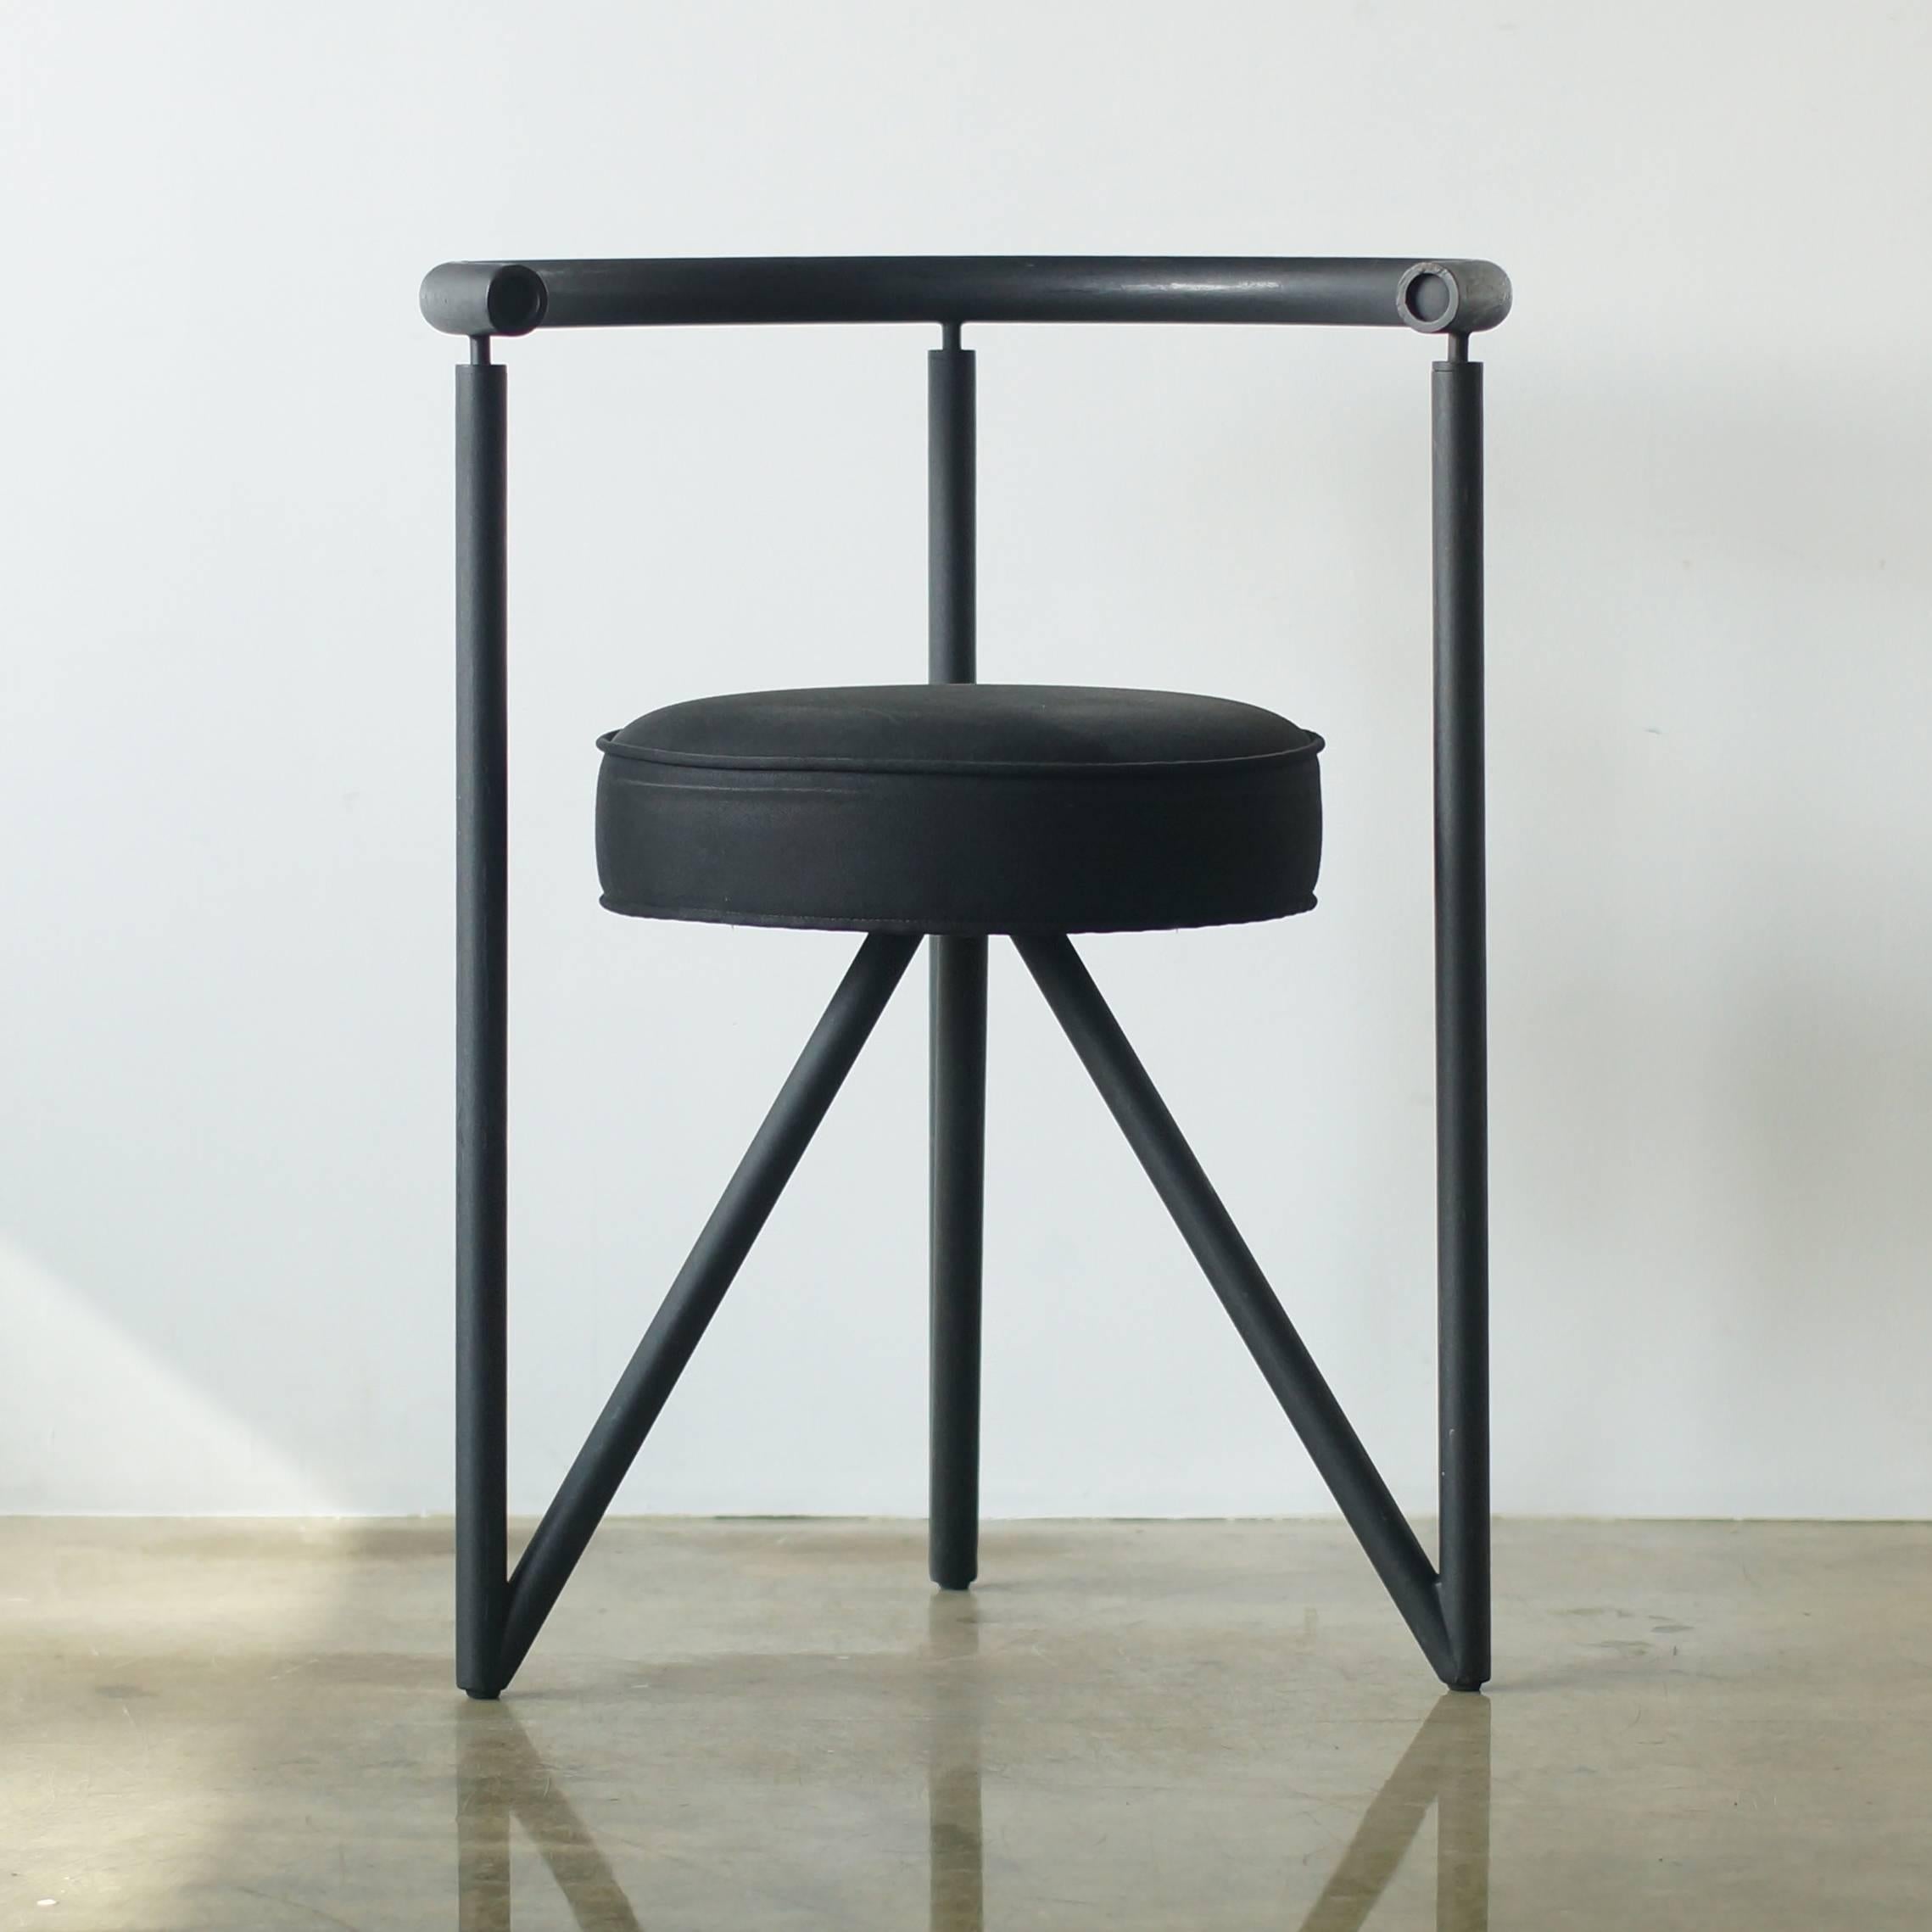 Philippe Starck's Miss Dorn. Set of four. Starck's early works in Postmodern feeling. Seat is black cotton.